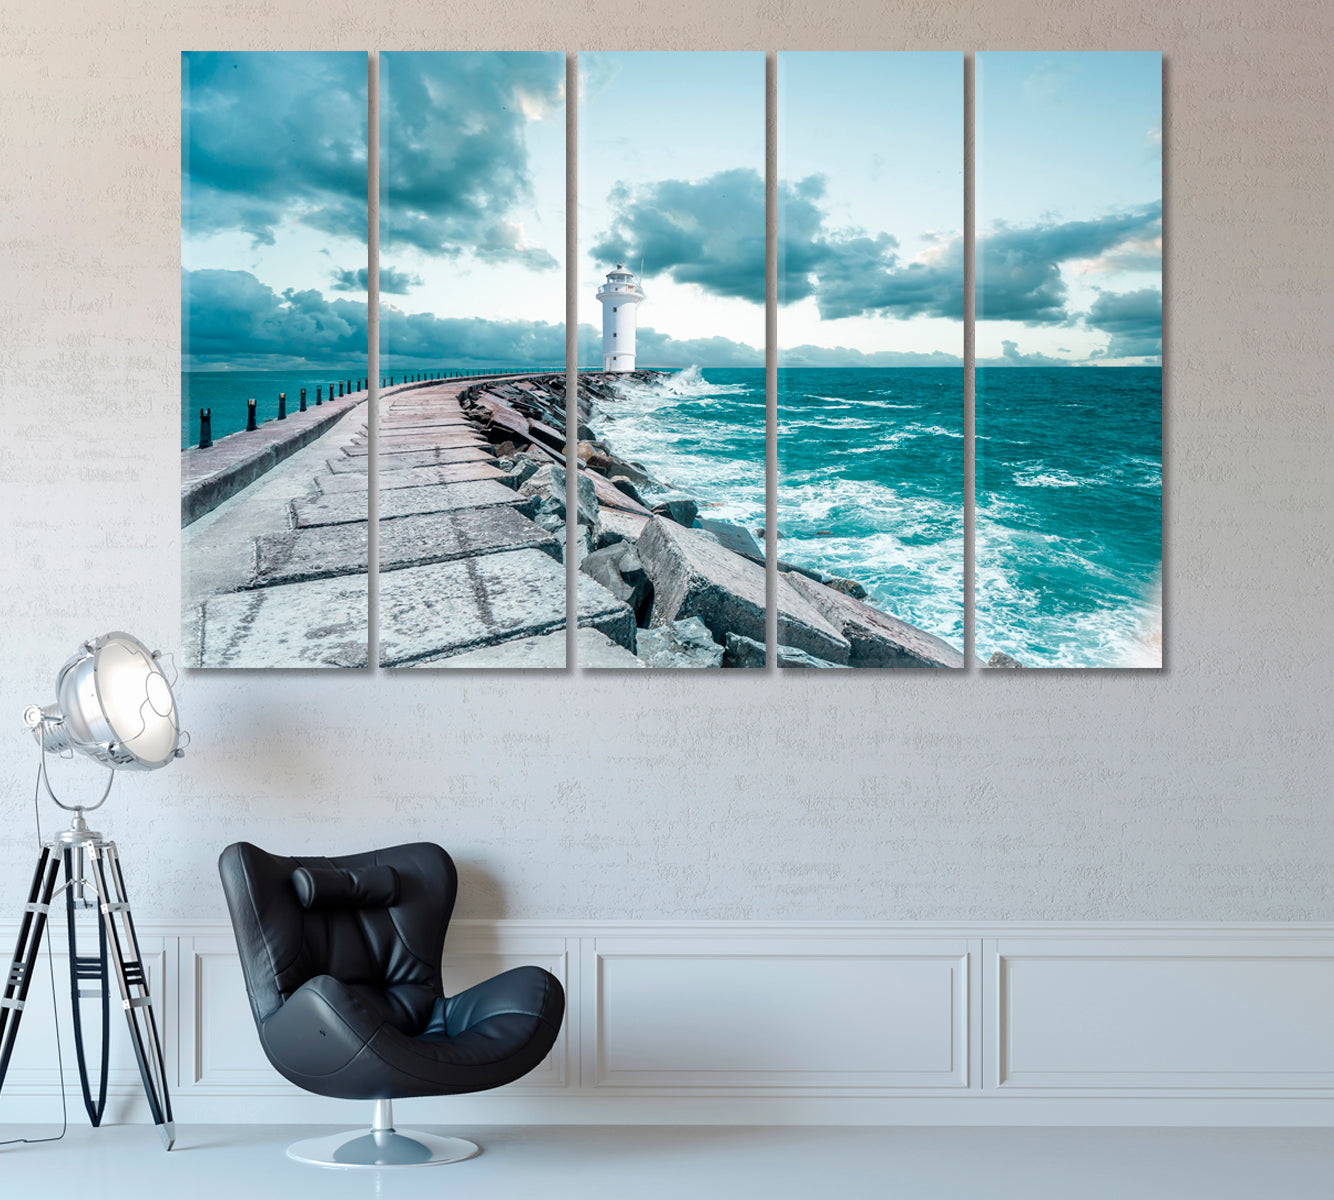 Stormy Waves over Lighthouse Canvas Print ArtLexy 5 Panels 36"x24" inches 